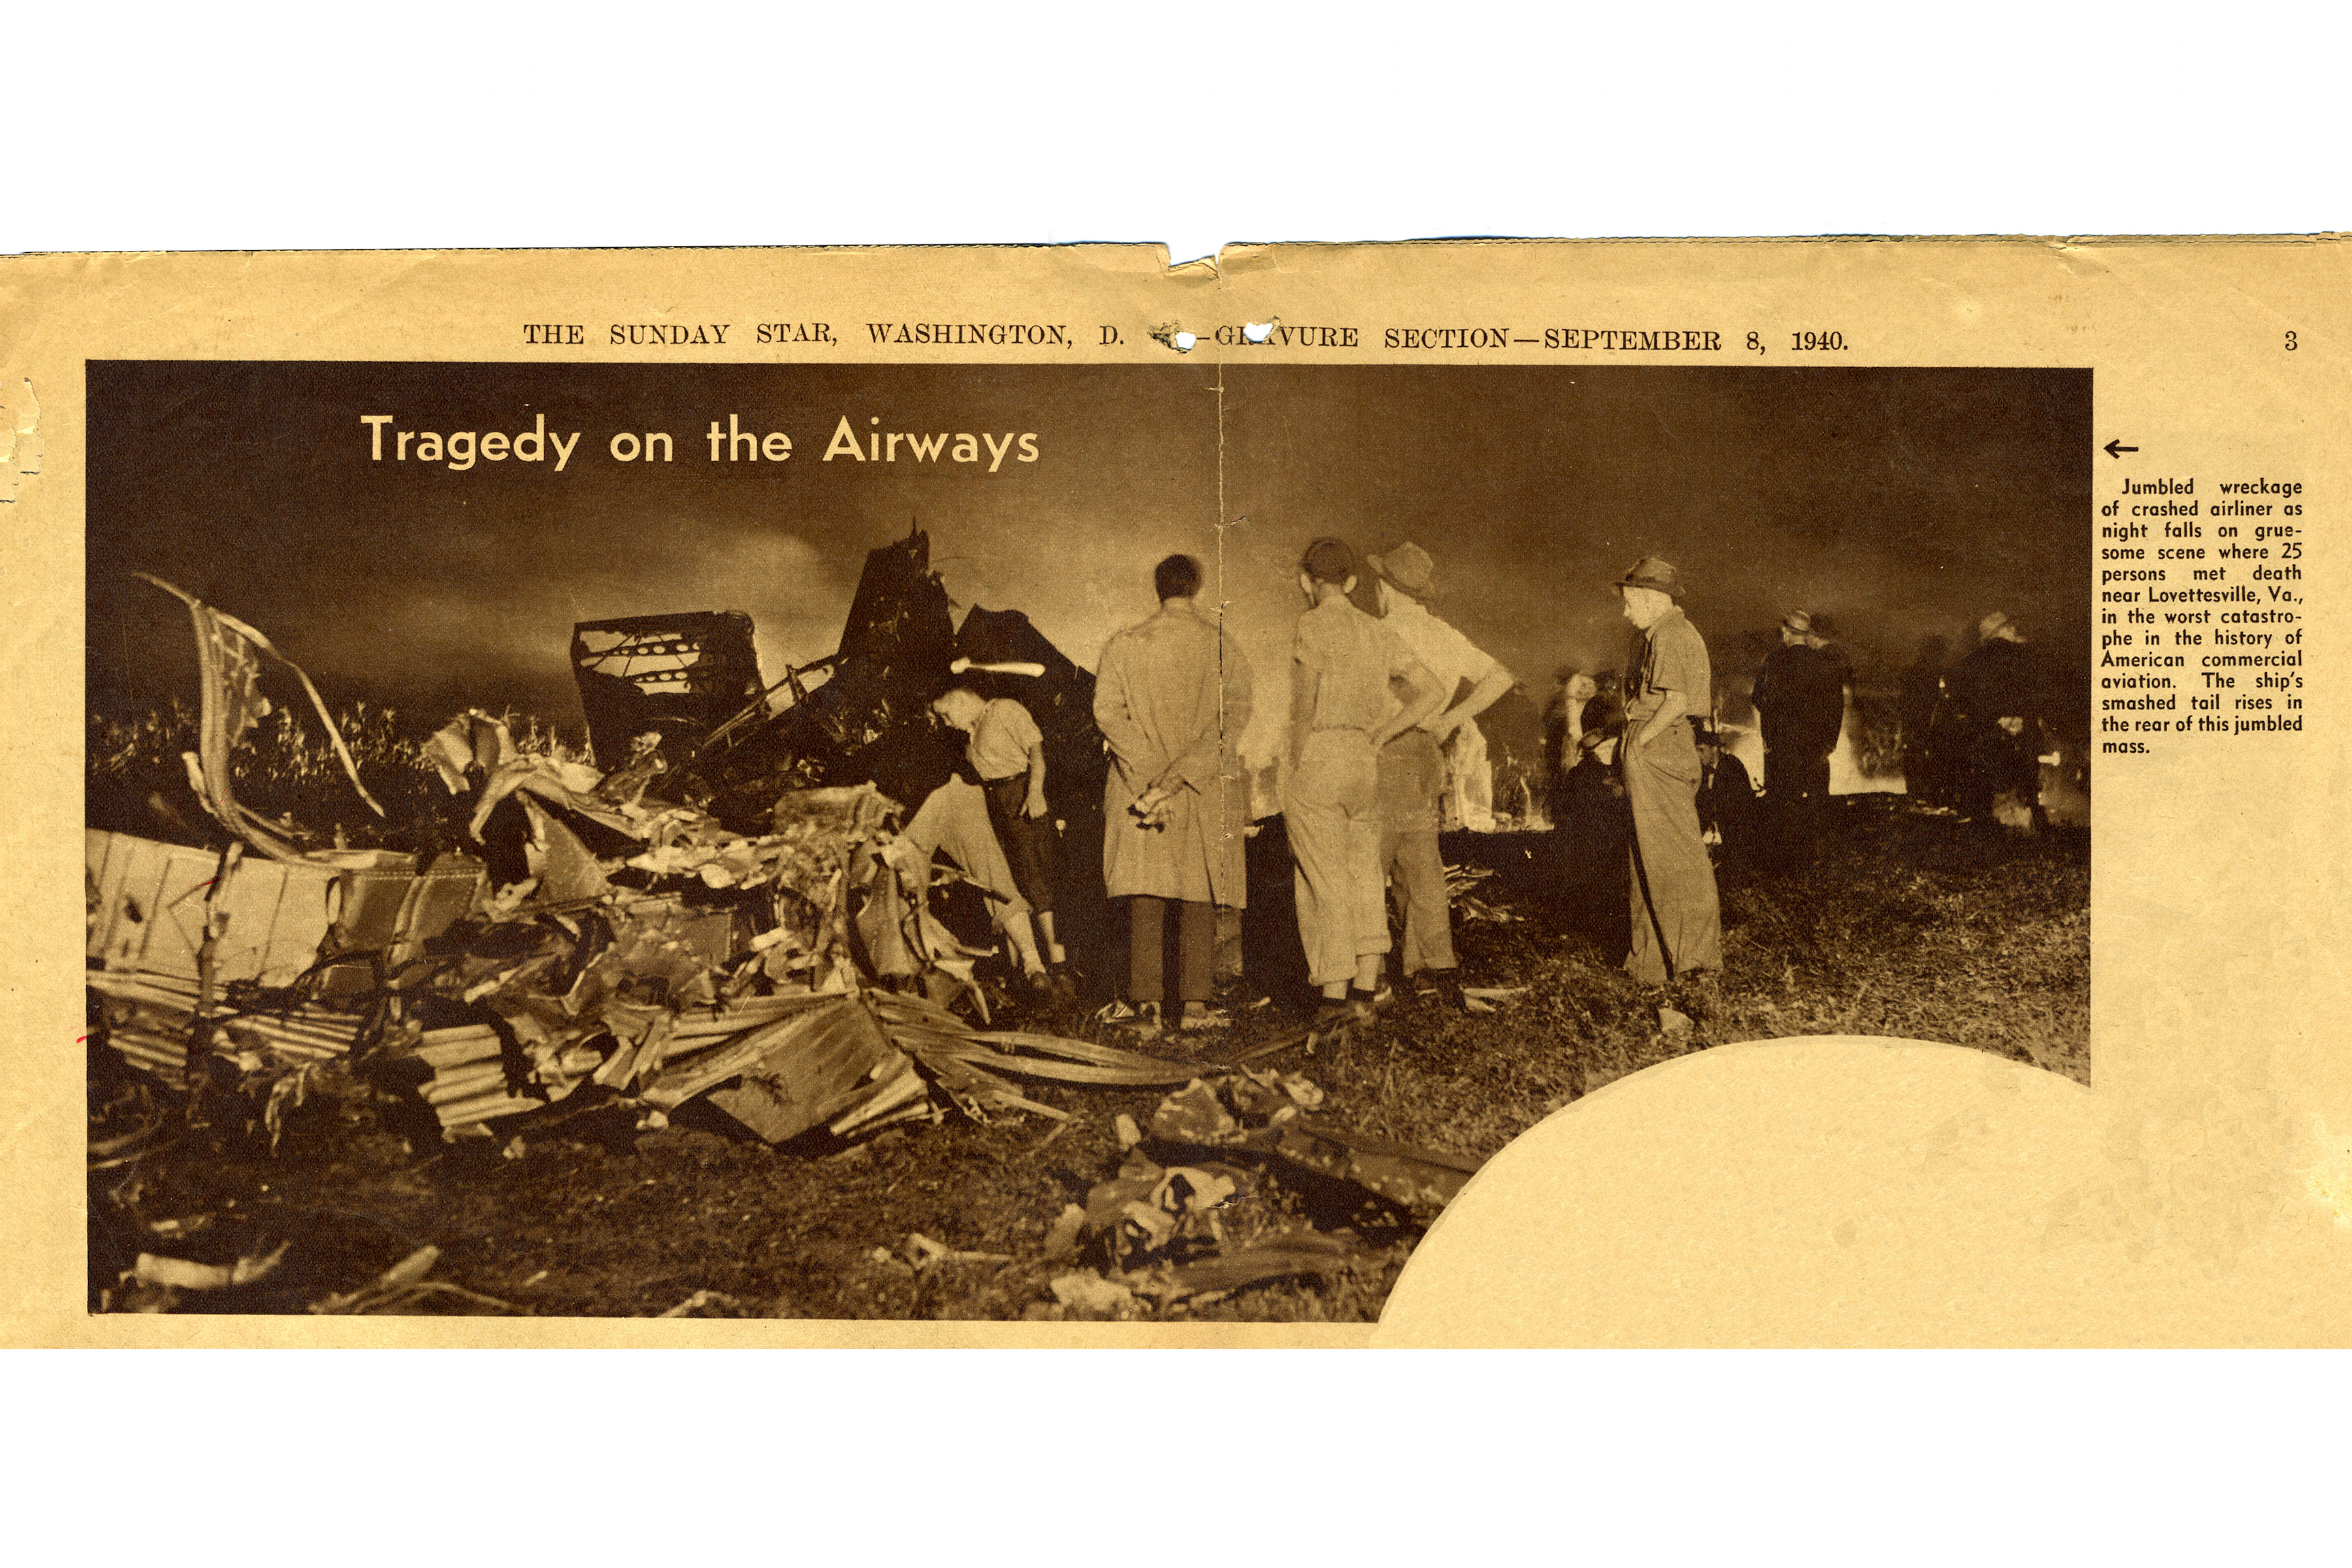 1940-09-08-lovettsville-air-disaster-sunday-star-gravure-section-washington-dc_photo-1_8x12-inches